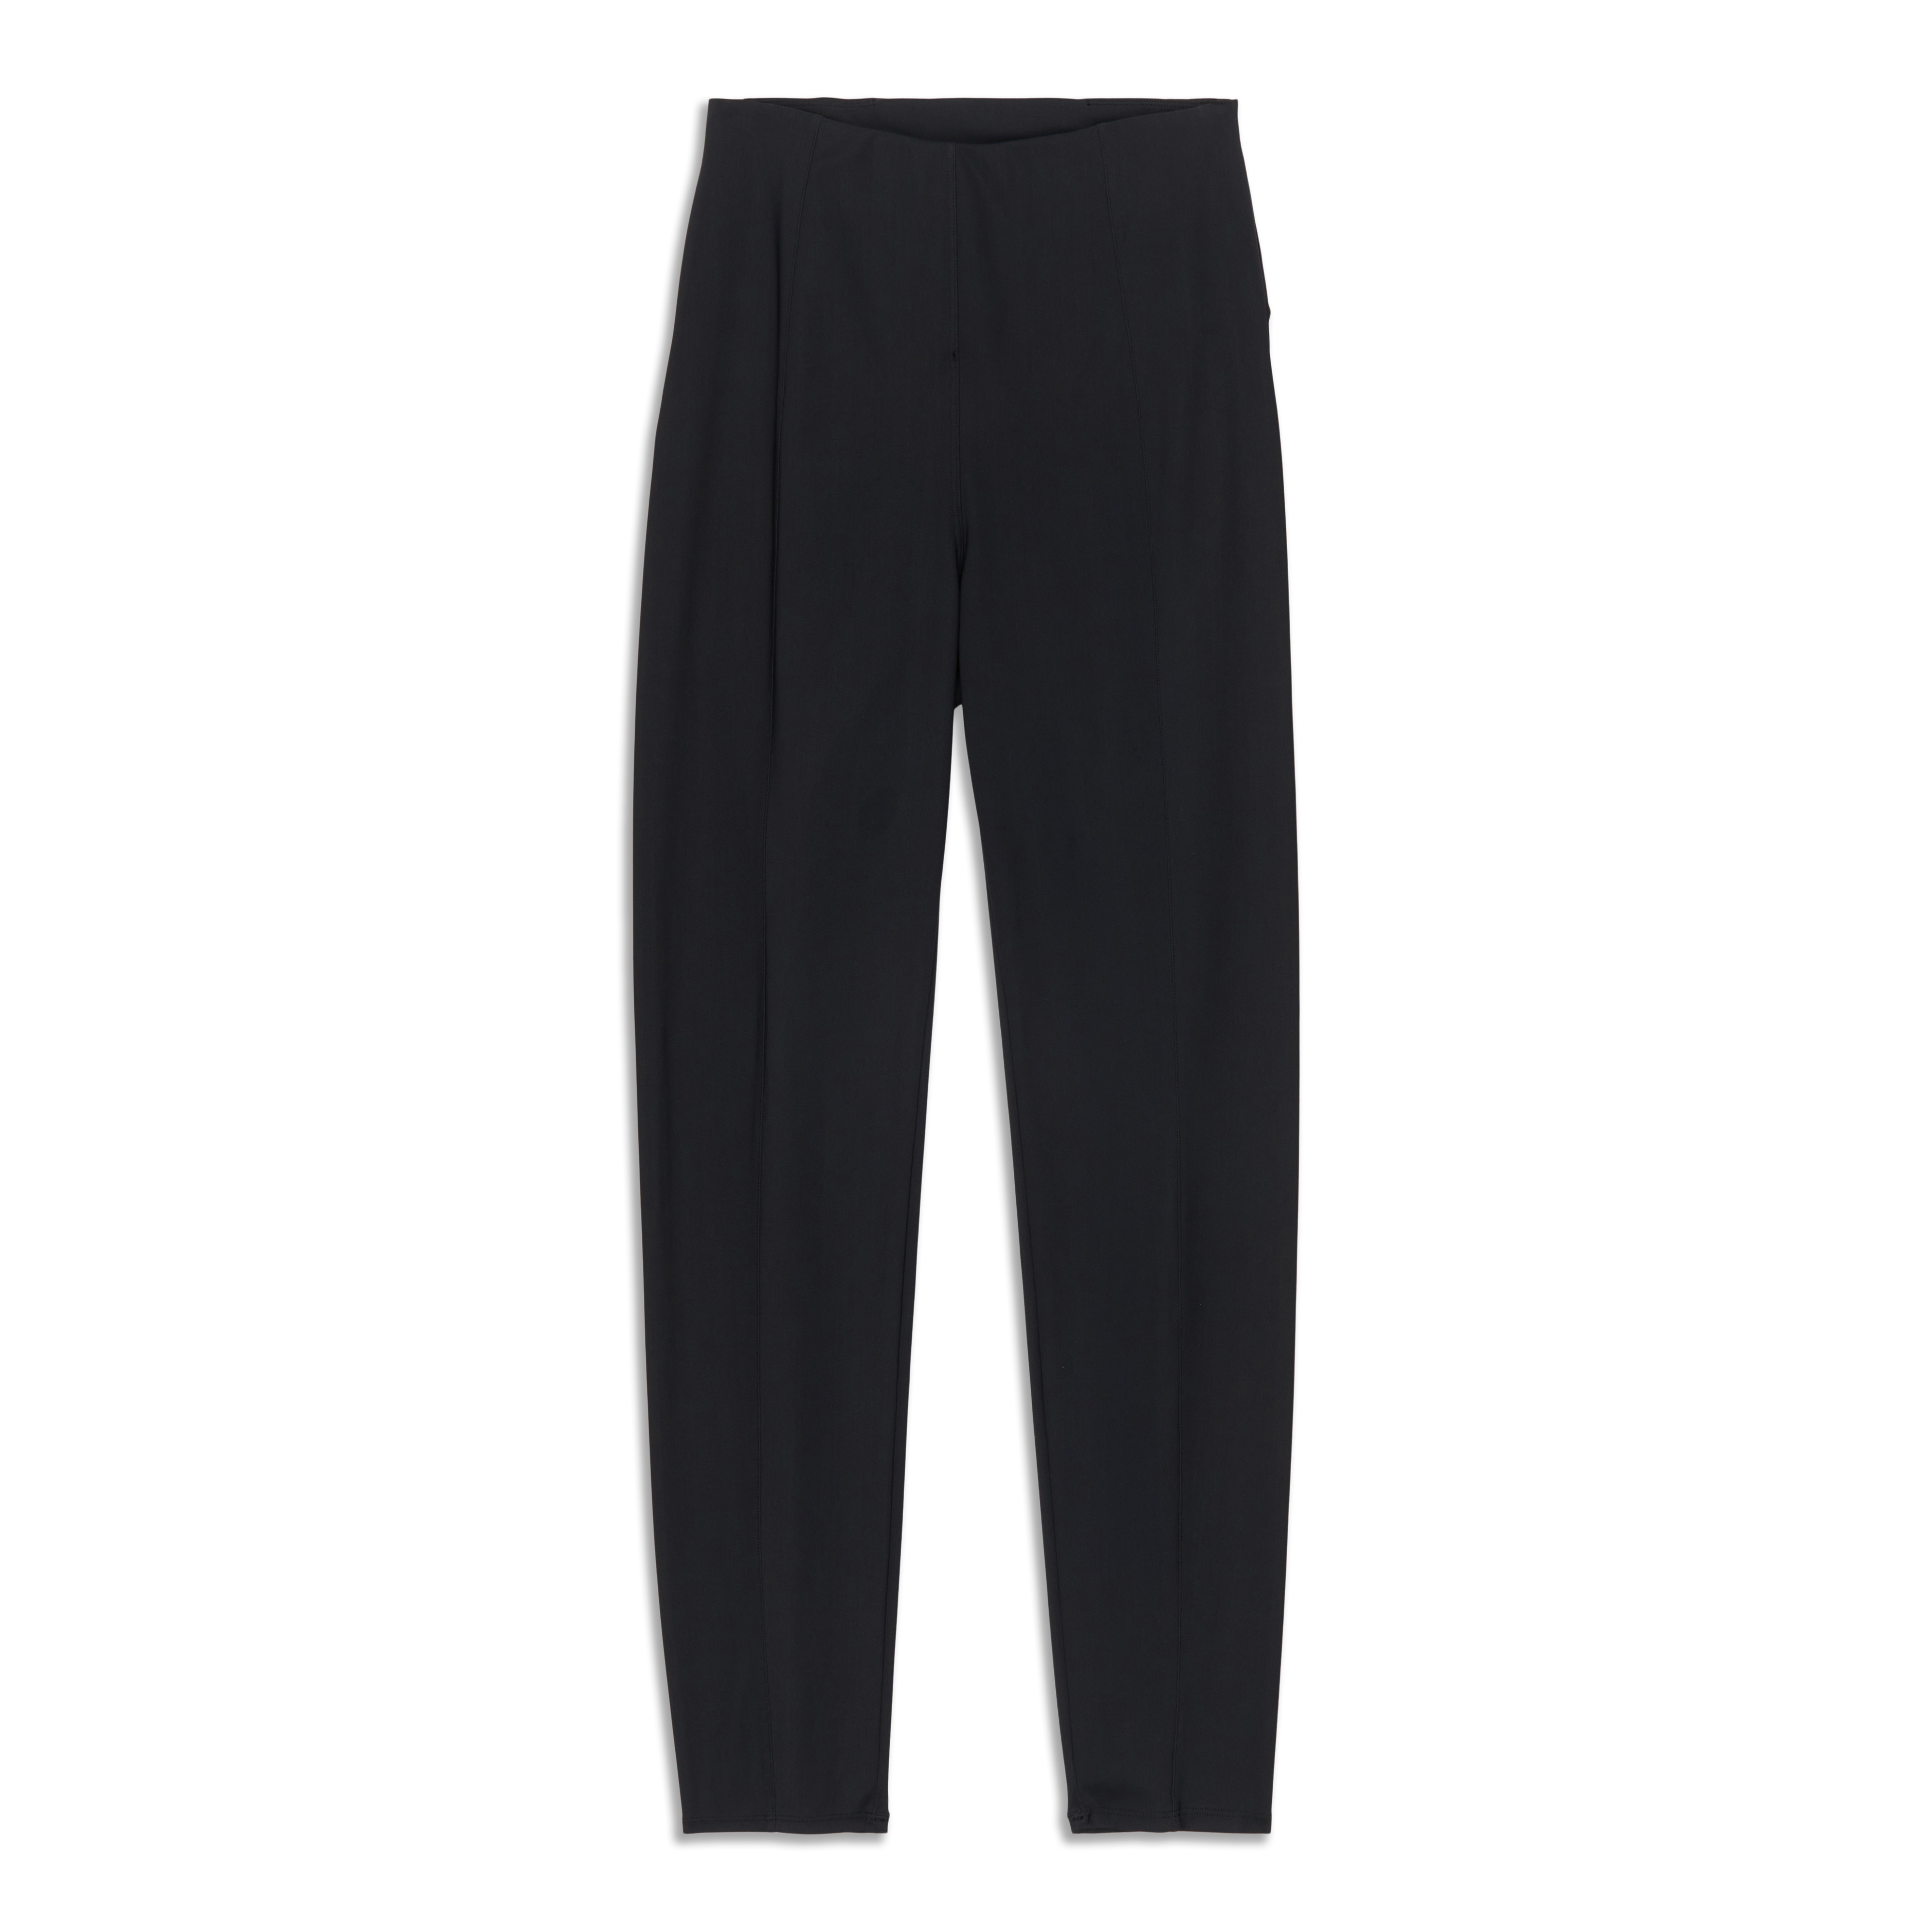 Lululemon Here to There High-Rise 7/8 Pant - Crosshatch Texture Magnet Grey  Multi / Magnet Grey - lulu fanatics